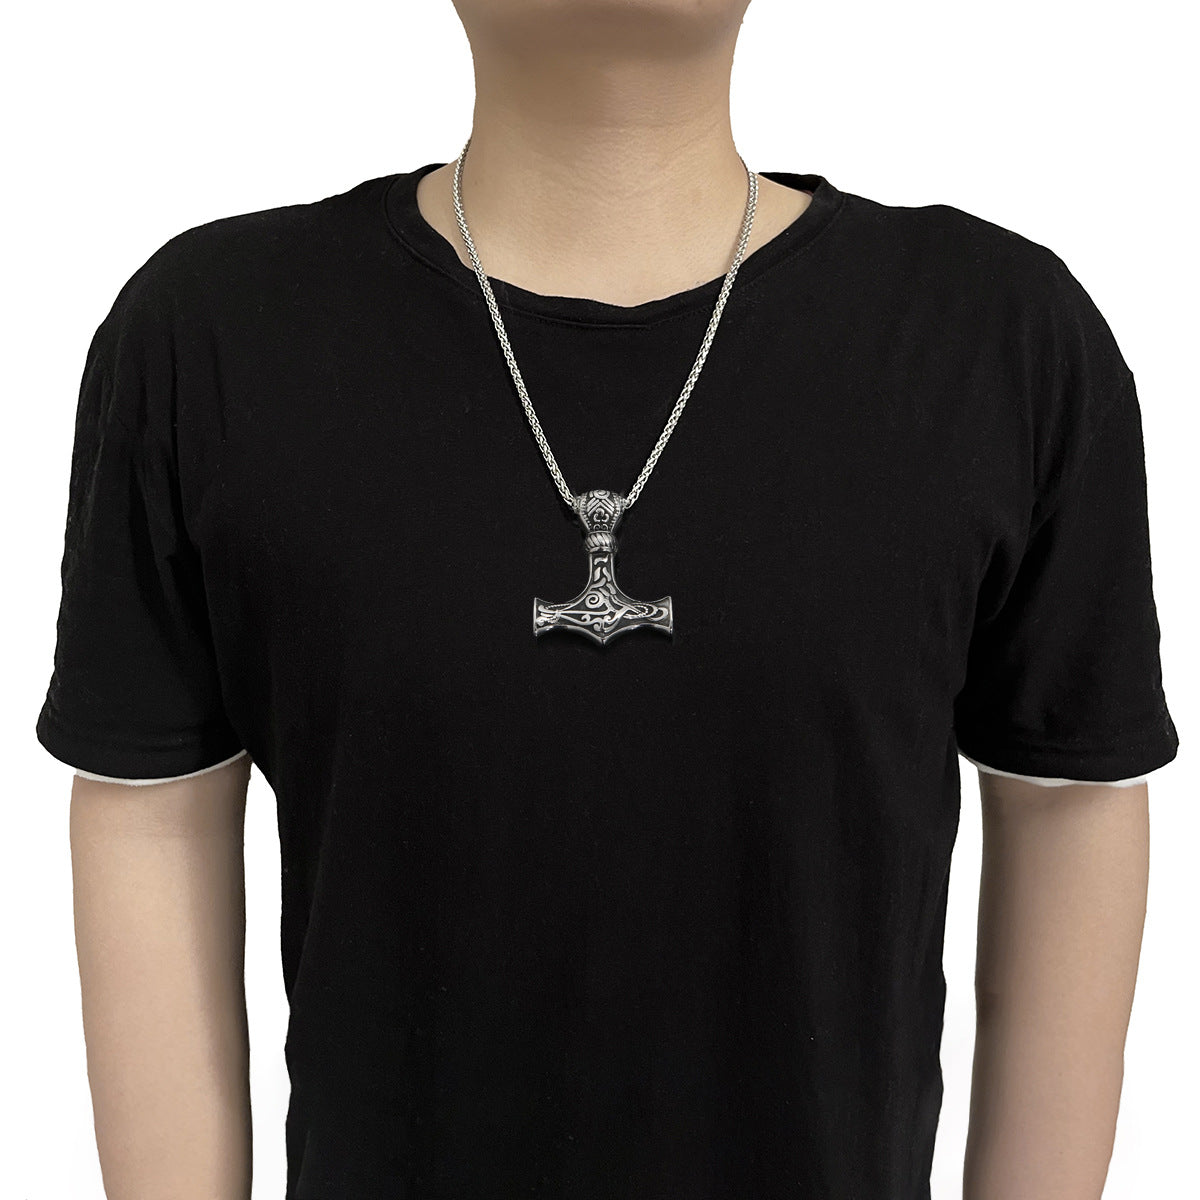 Viking - Thor's Hammer Pendant | Titanium Steel Necklace worn by a boy in a black t-shirt